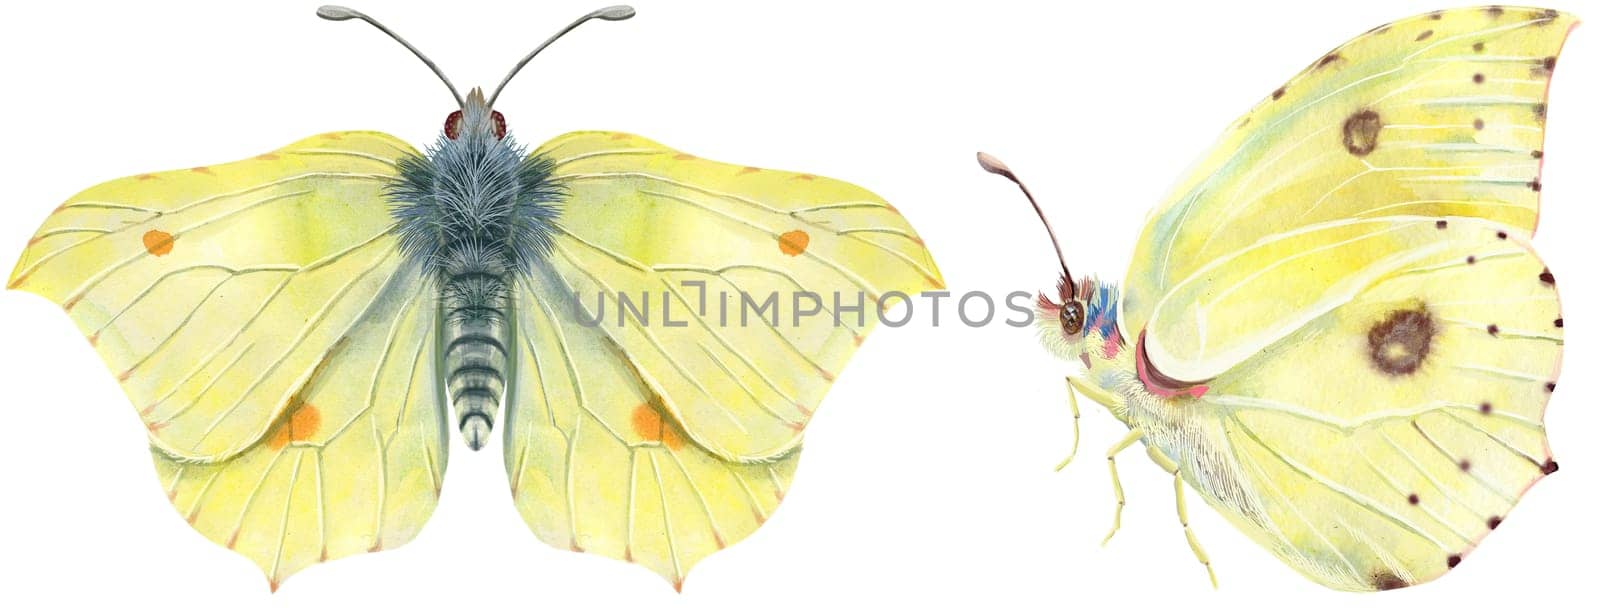 The yellow Lemongrass butterfly. Watercolor illustration